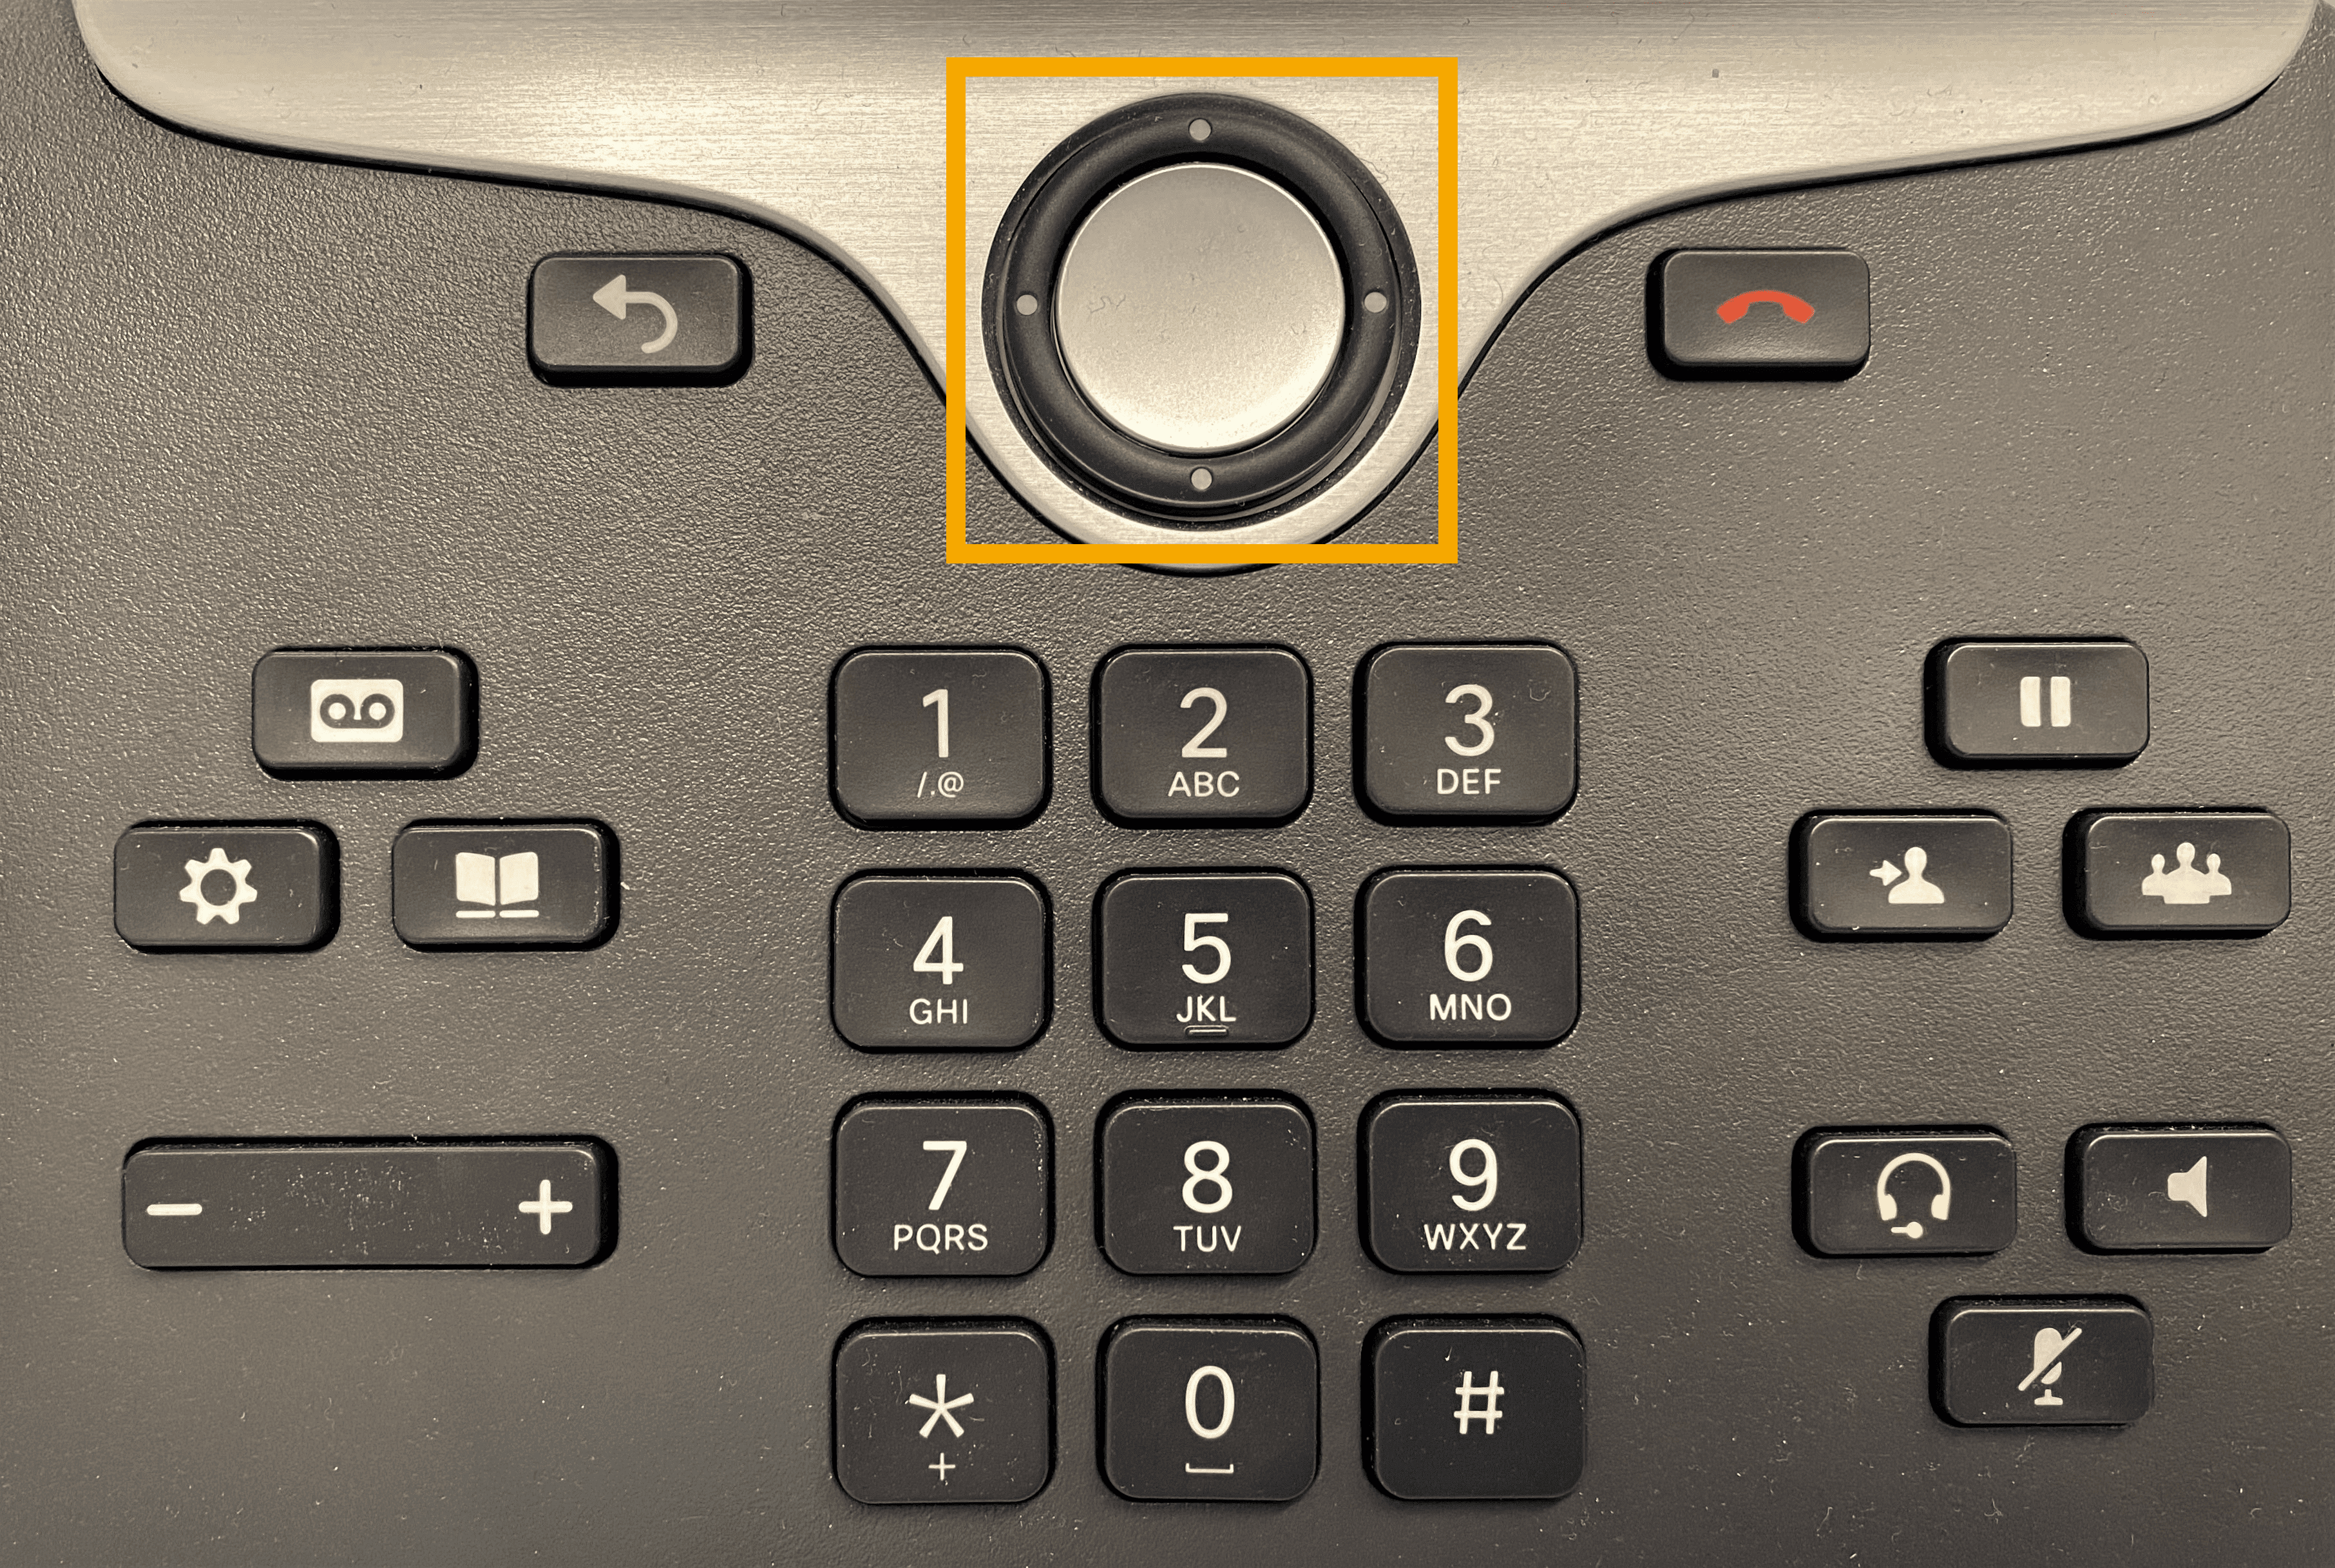 Control pad on the phone